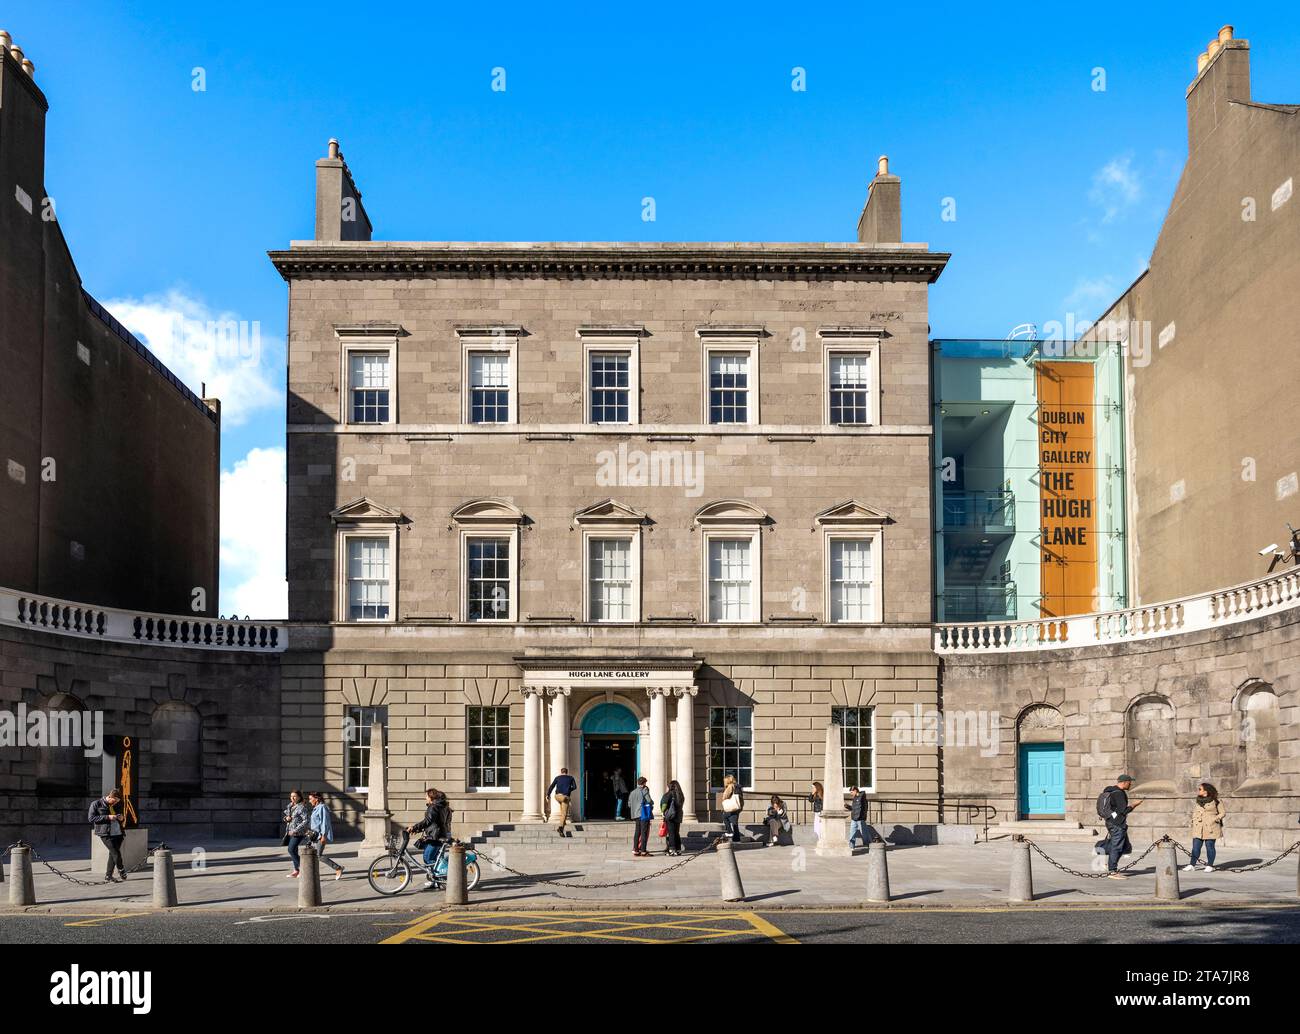 Neoclassical façade of Dublin City Gallery The Hugh Lane, hosted in Charlemont House built in mid-18th century by William Chambers, Dublin, Ireland Stock Photo